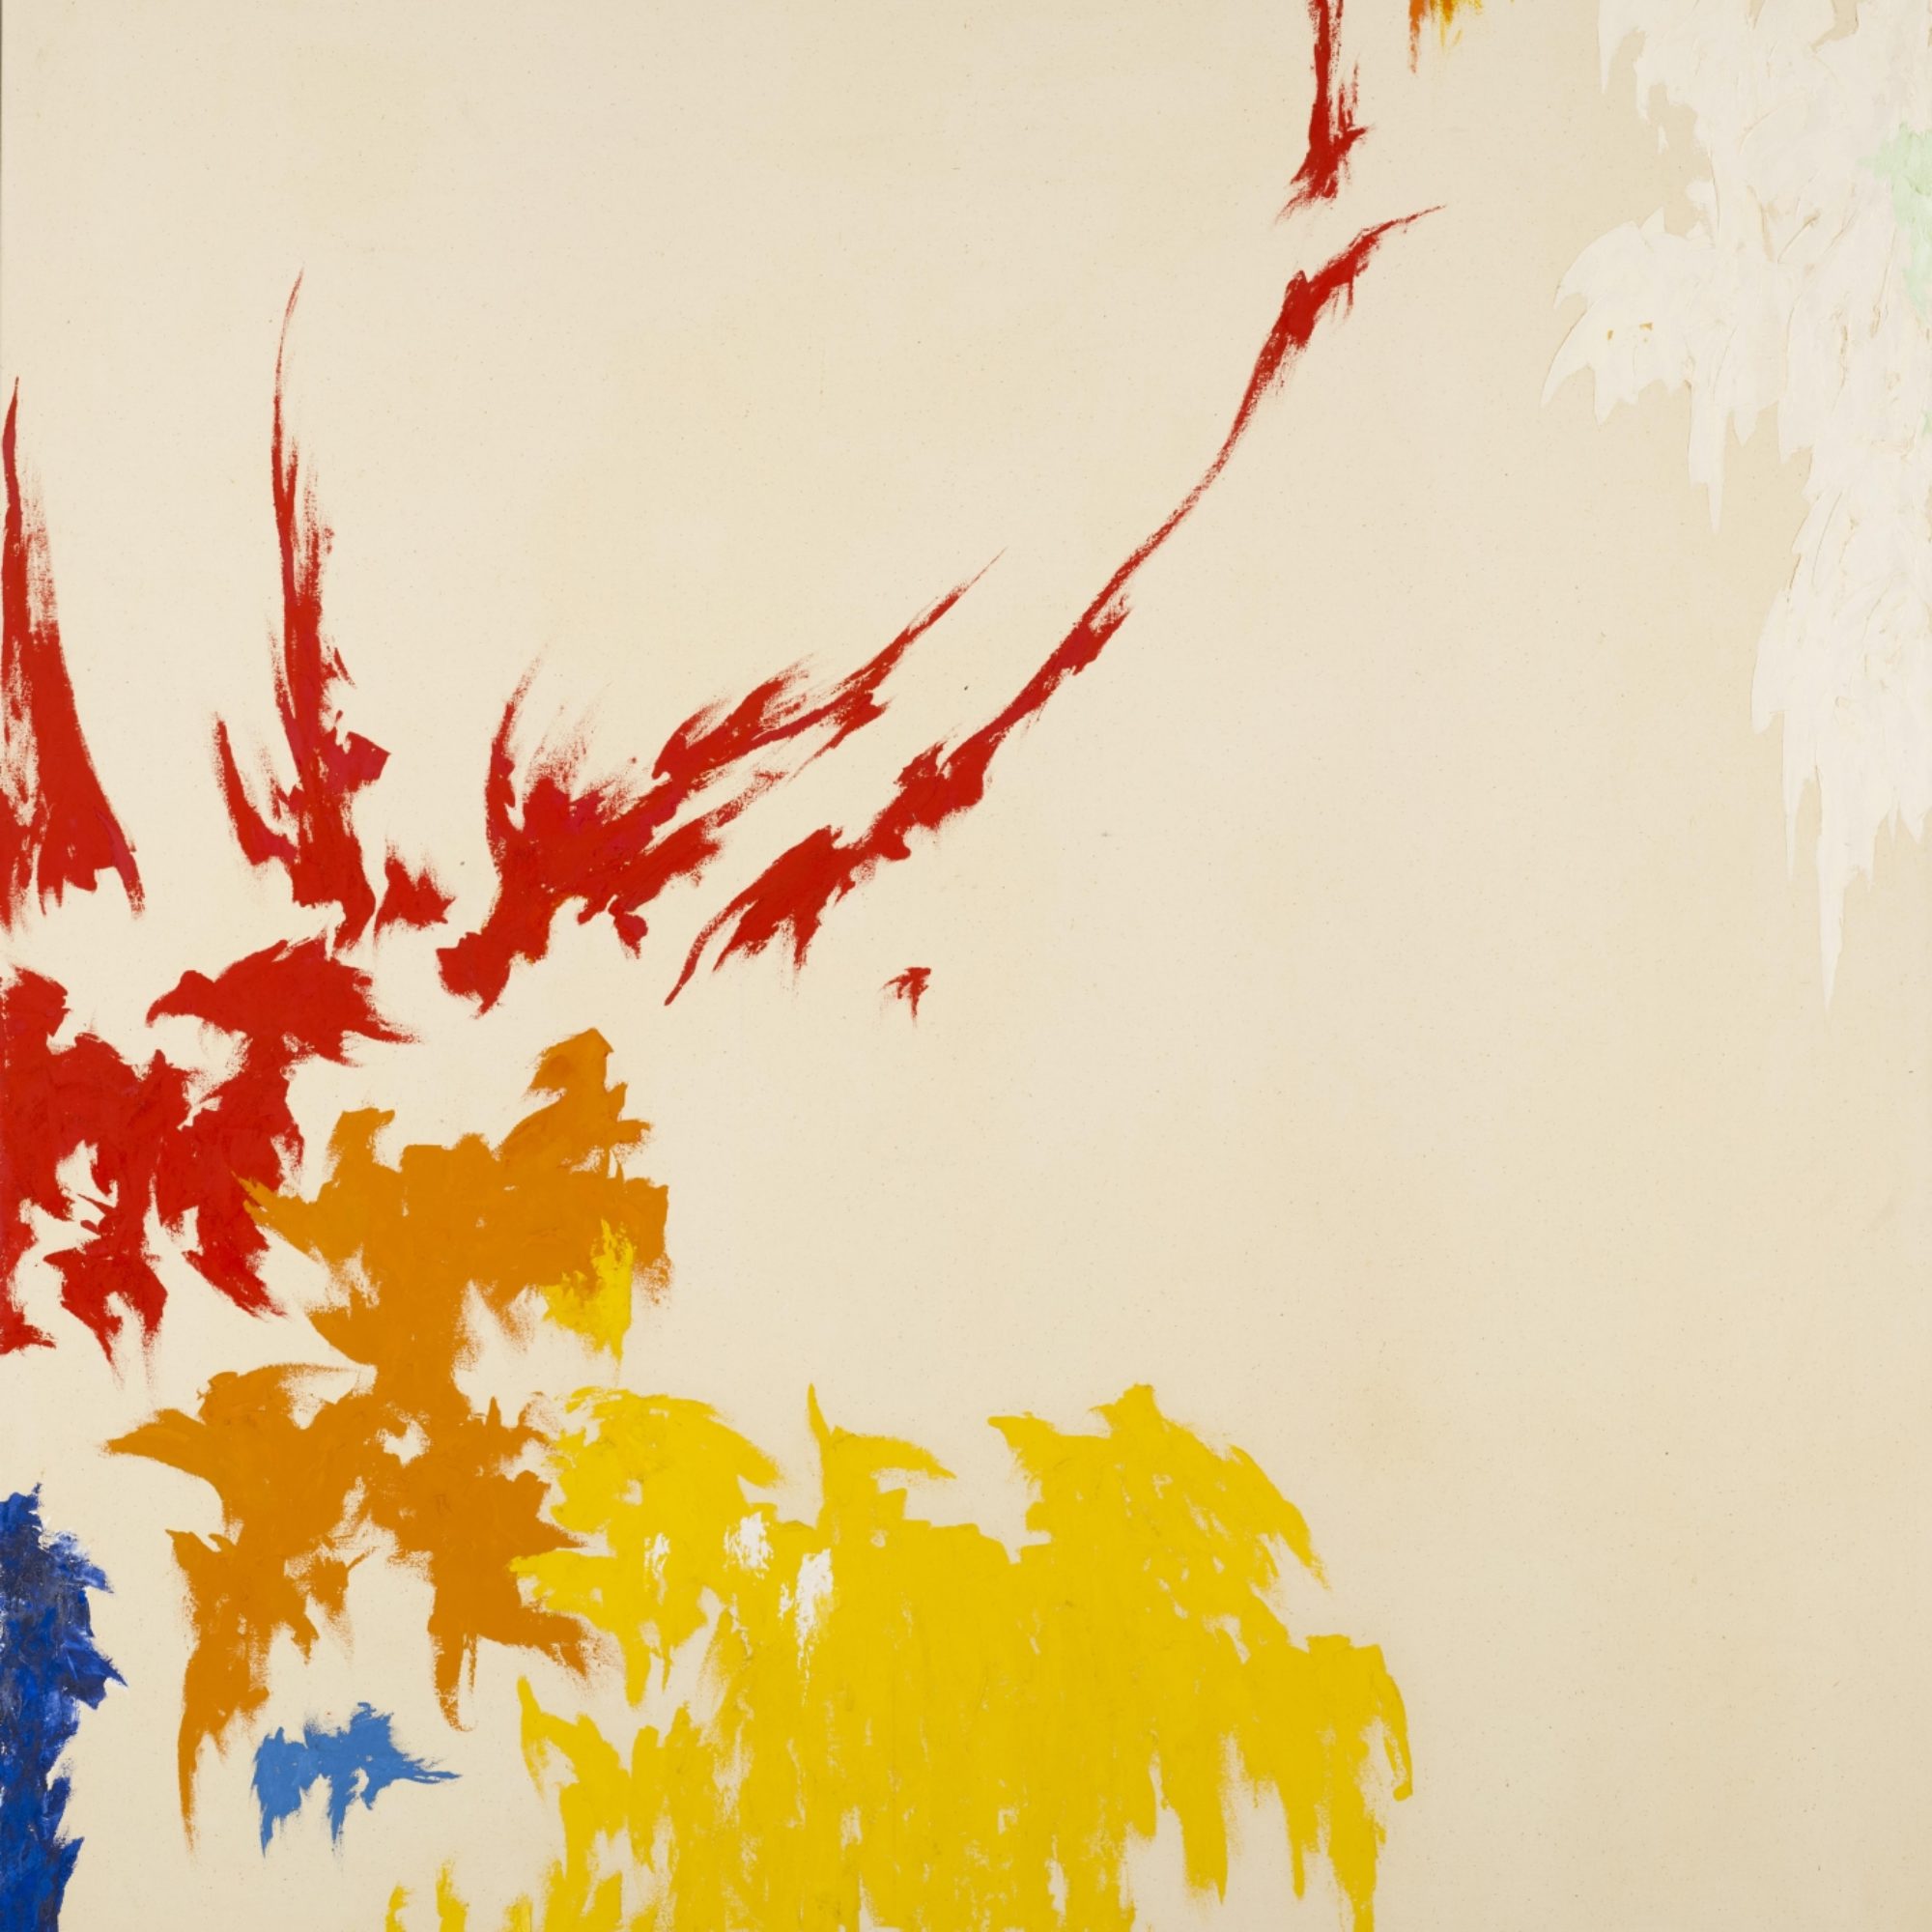 Abstract oil painting by Clyfford Still with bare canvas and red, orange, yellow, blue, and white paint